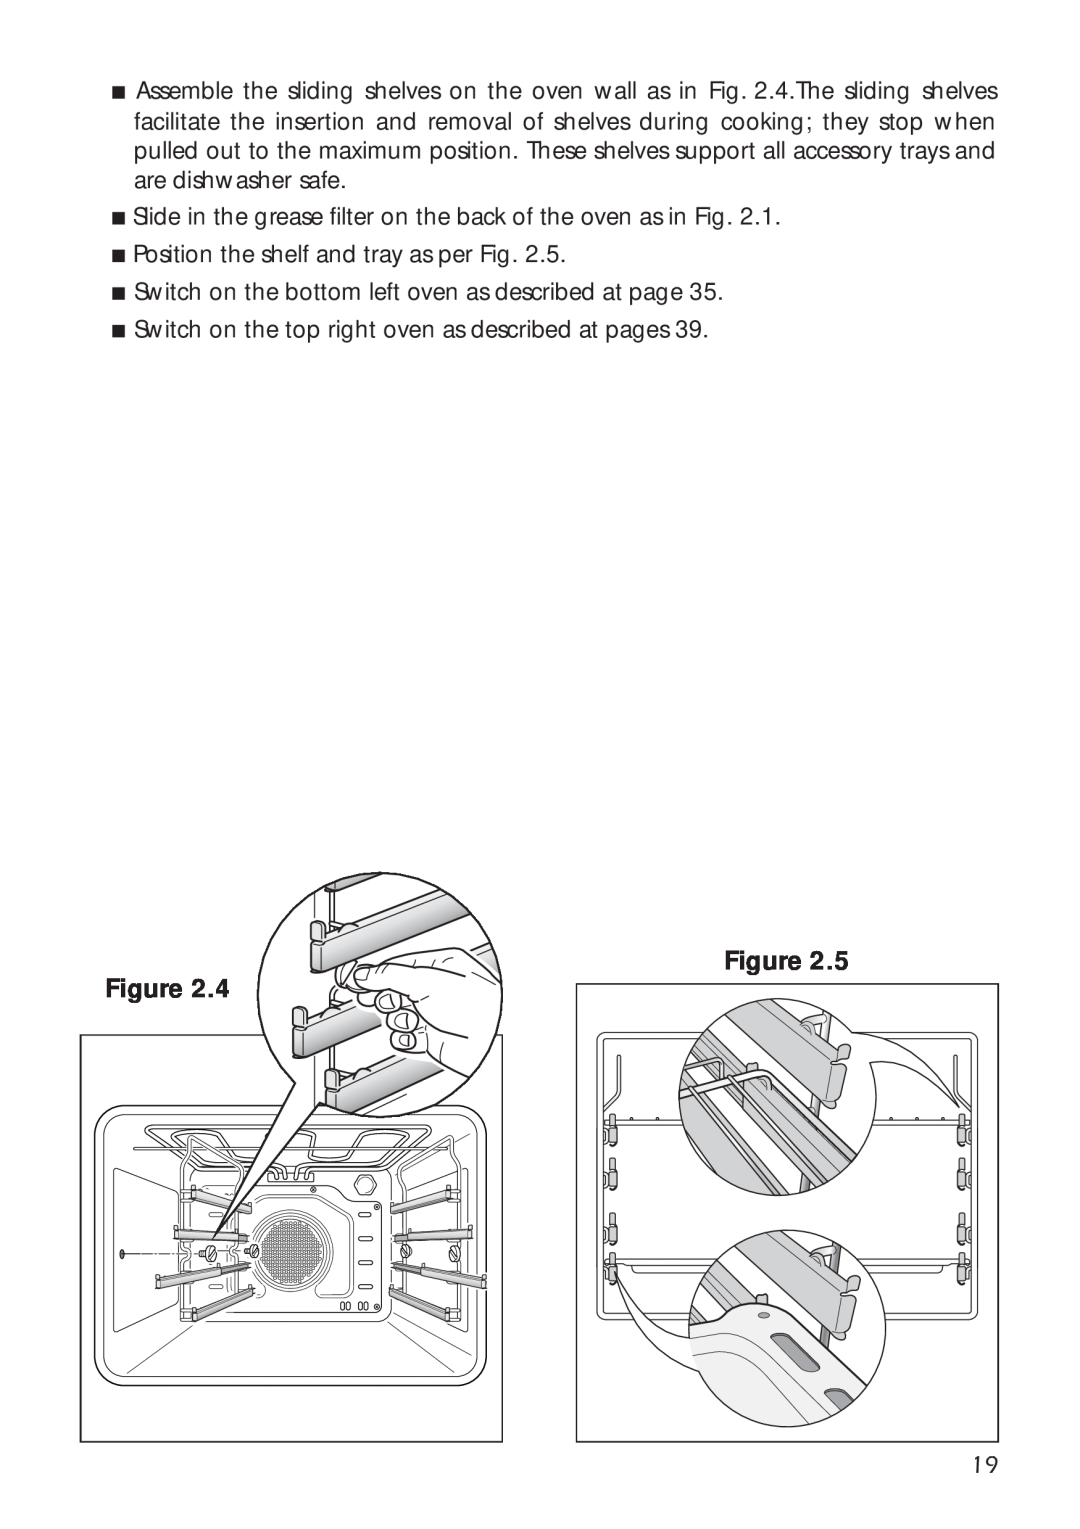 DeLonghi A 1346 G manual Position the shelf and tray as per Fig, Figure 